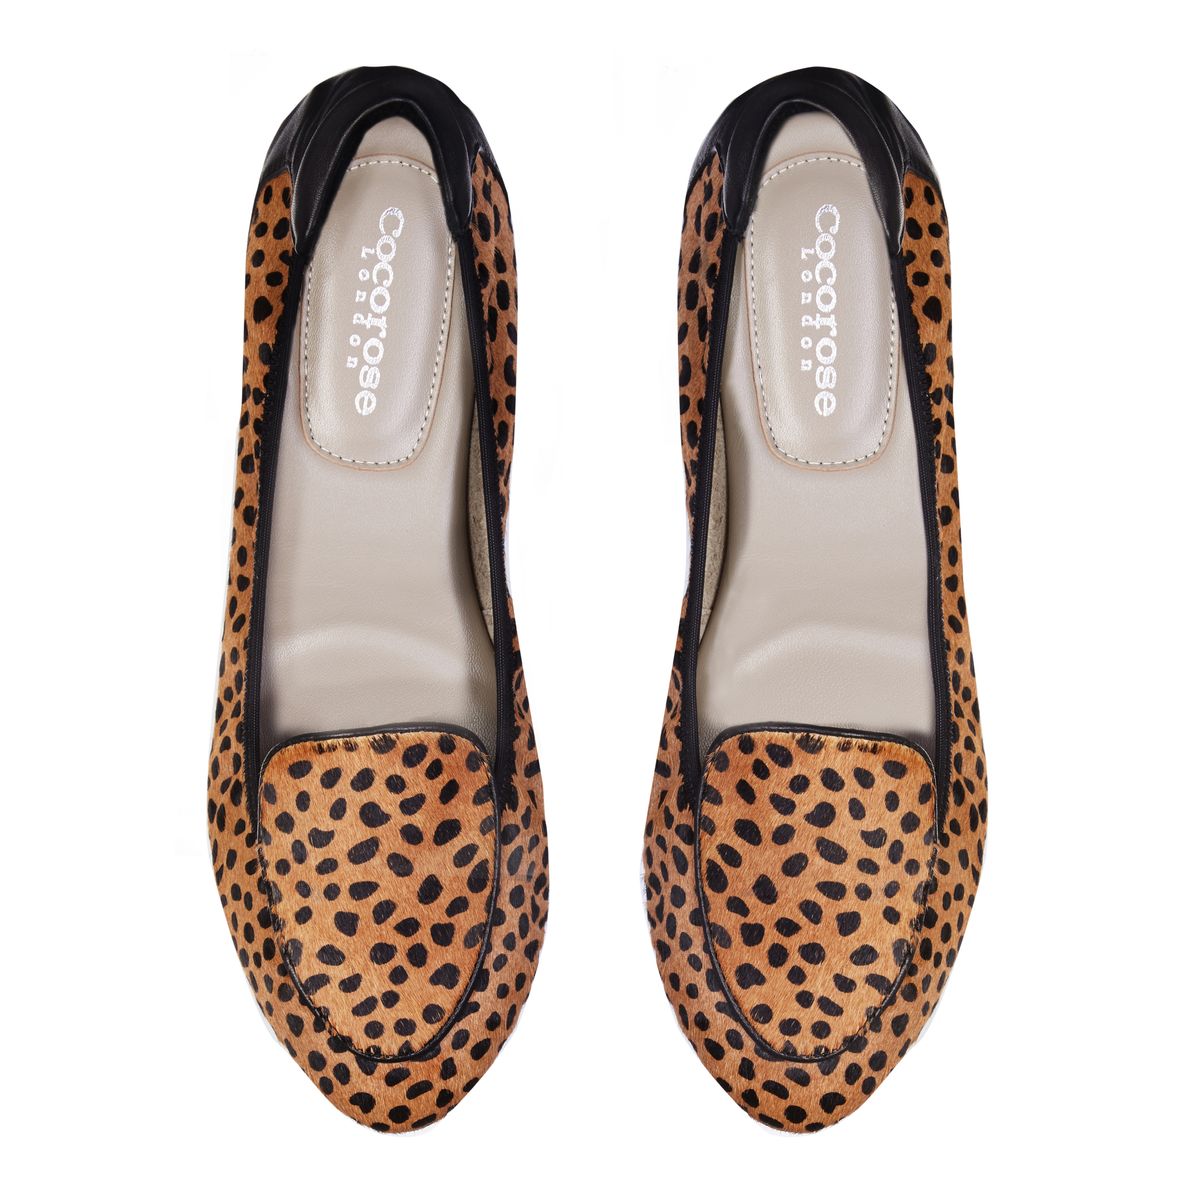 Leopard pony-hair leather loafer from Cocorose London